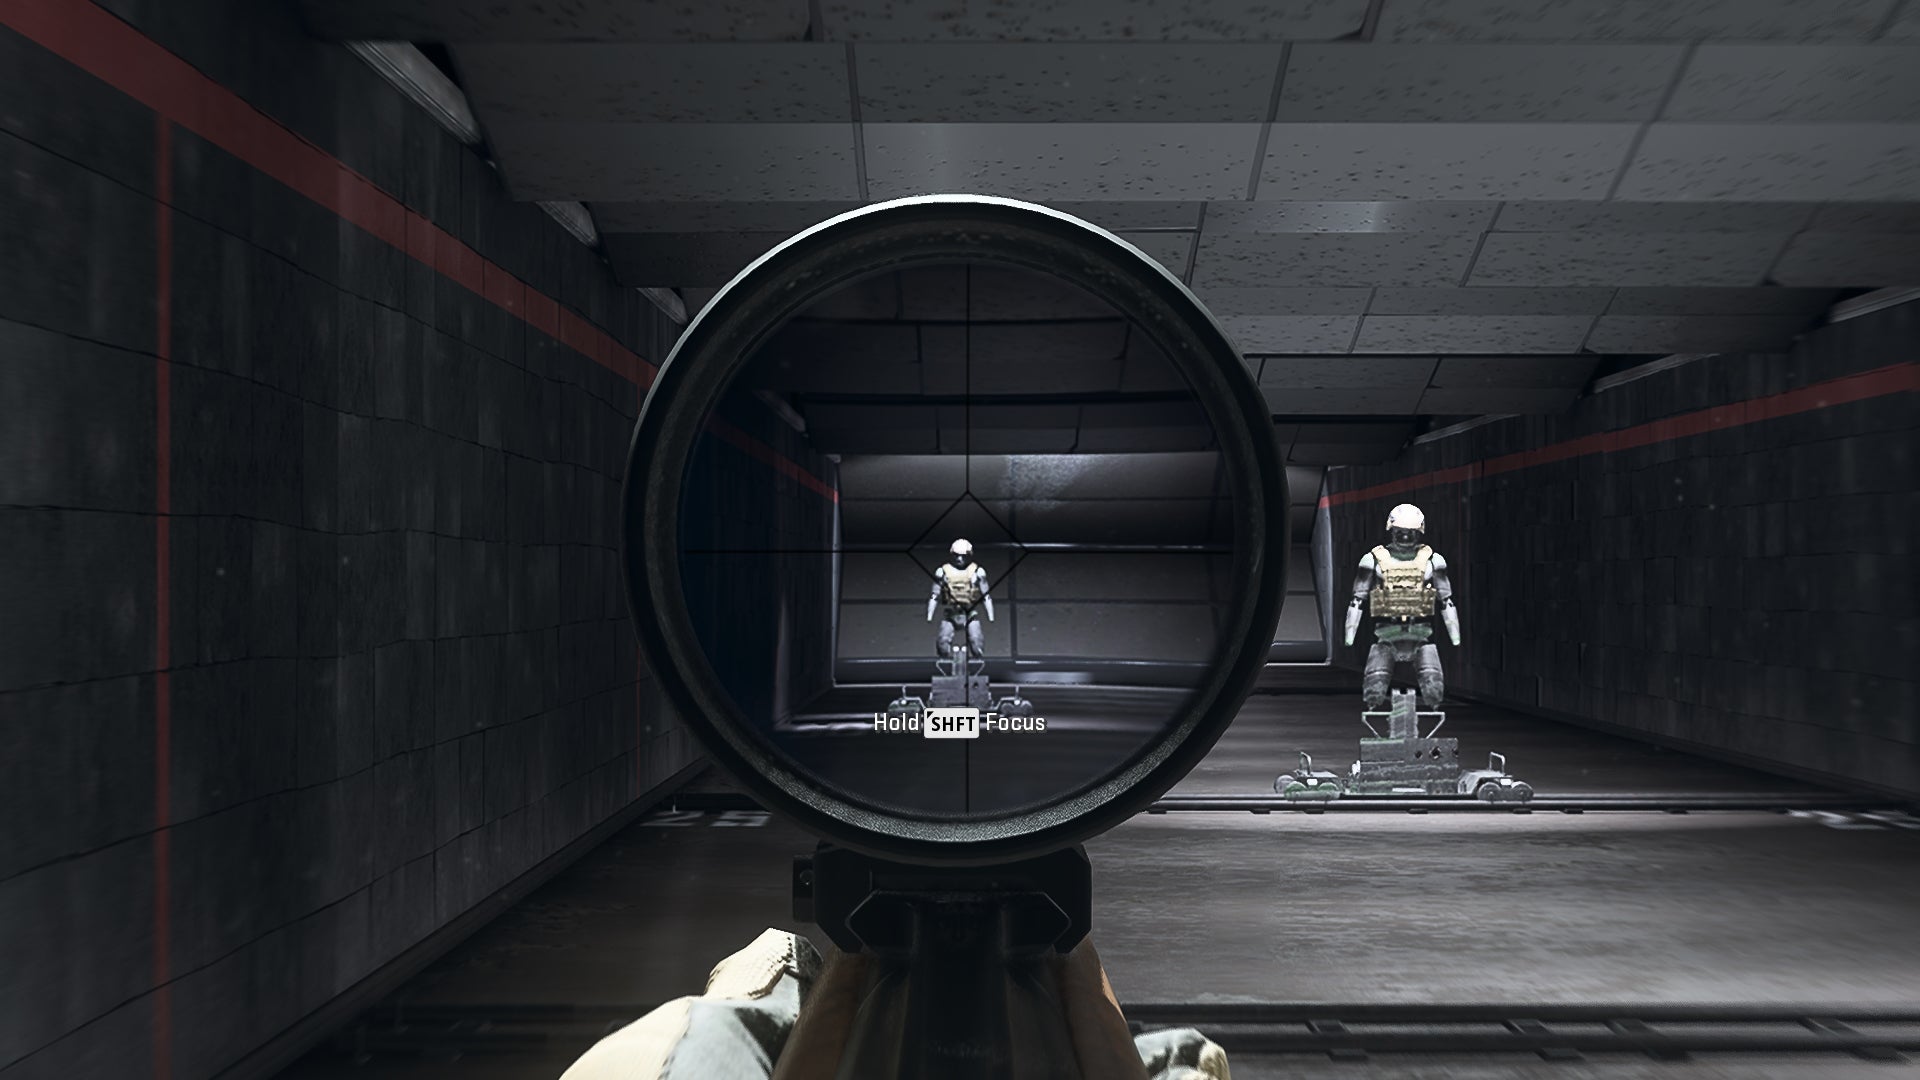 The player in Warzone 2.0 aims at a training dummy using the Daunt C80 optic attachment.